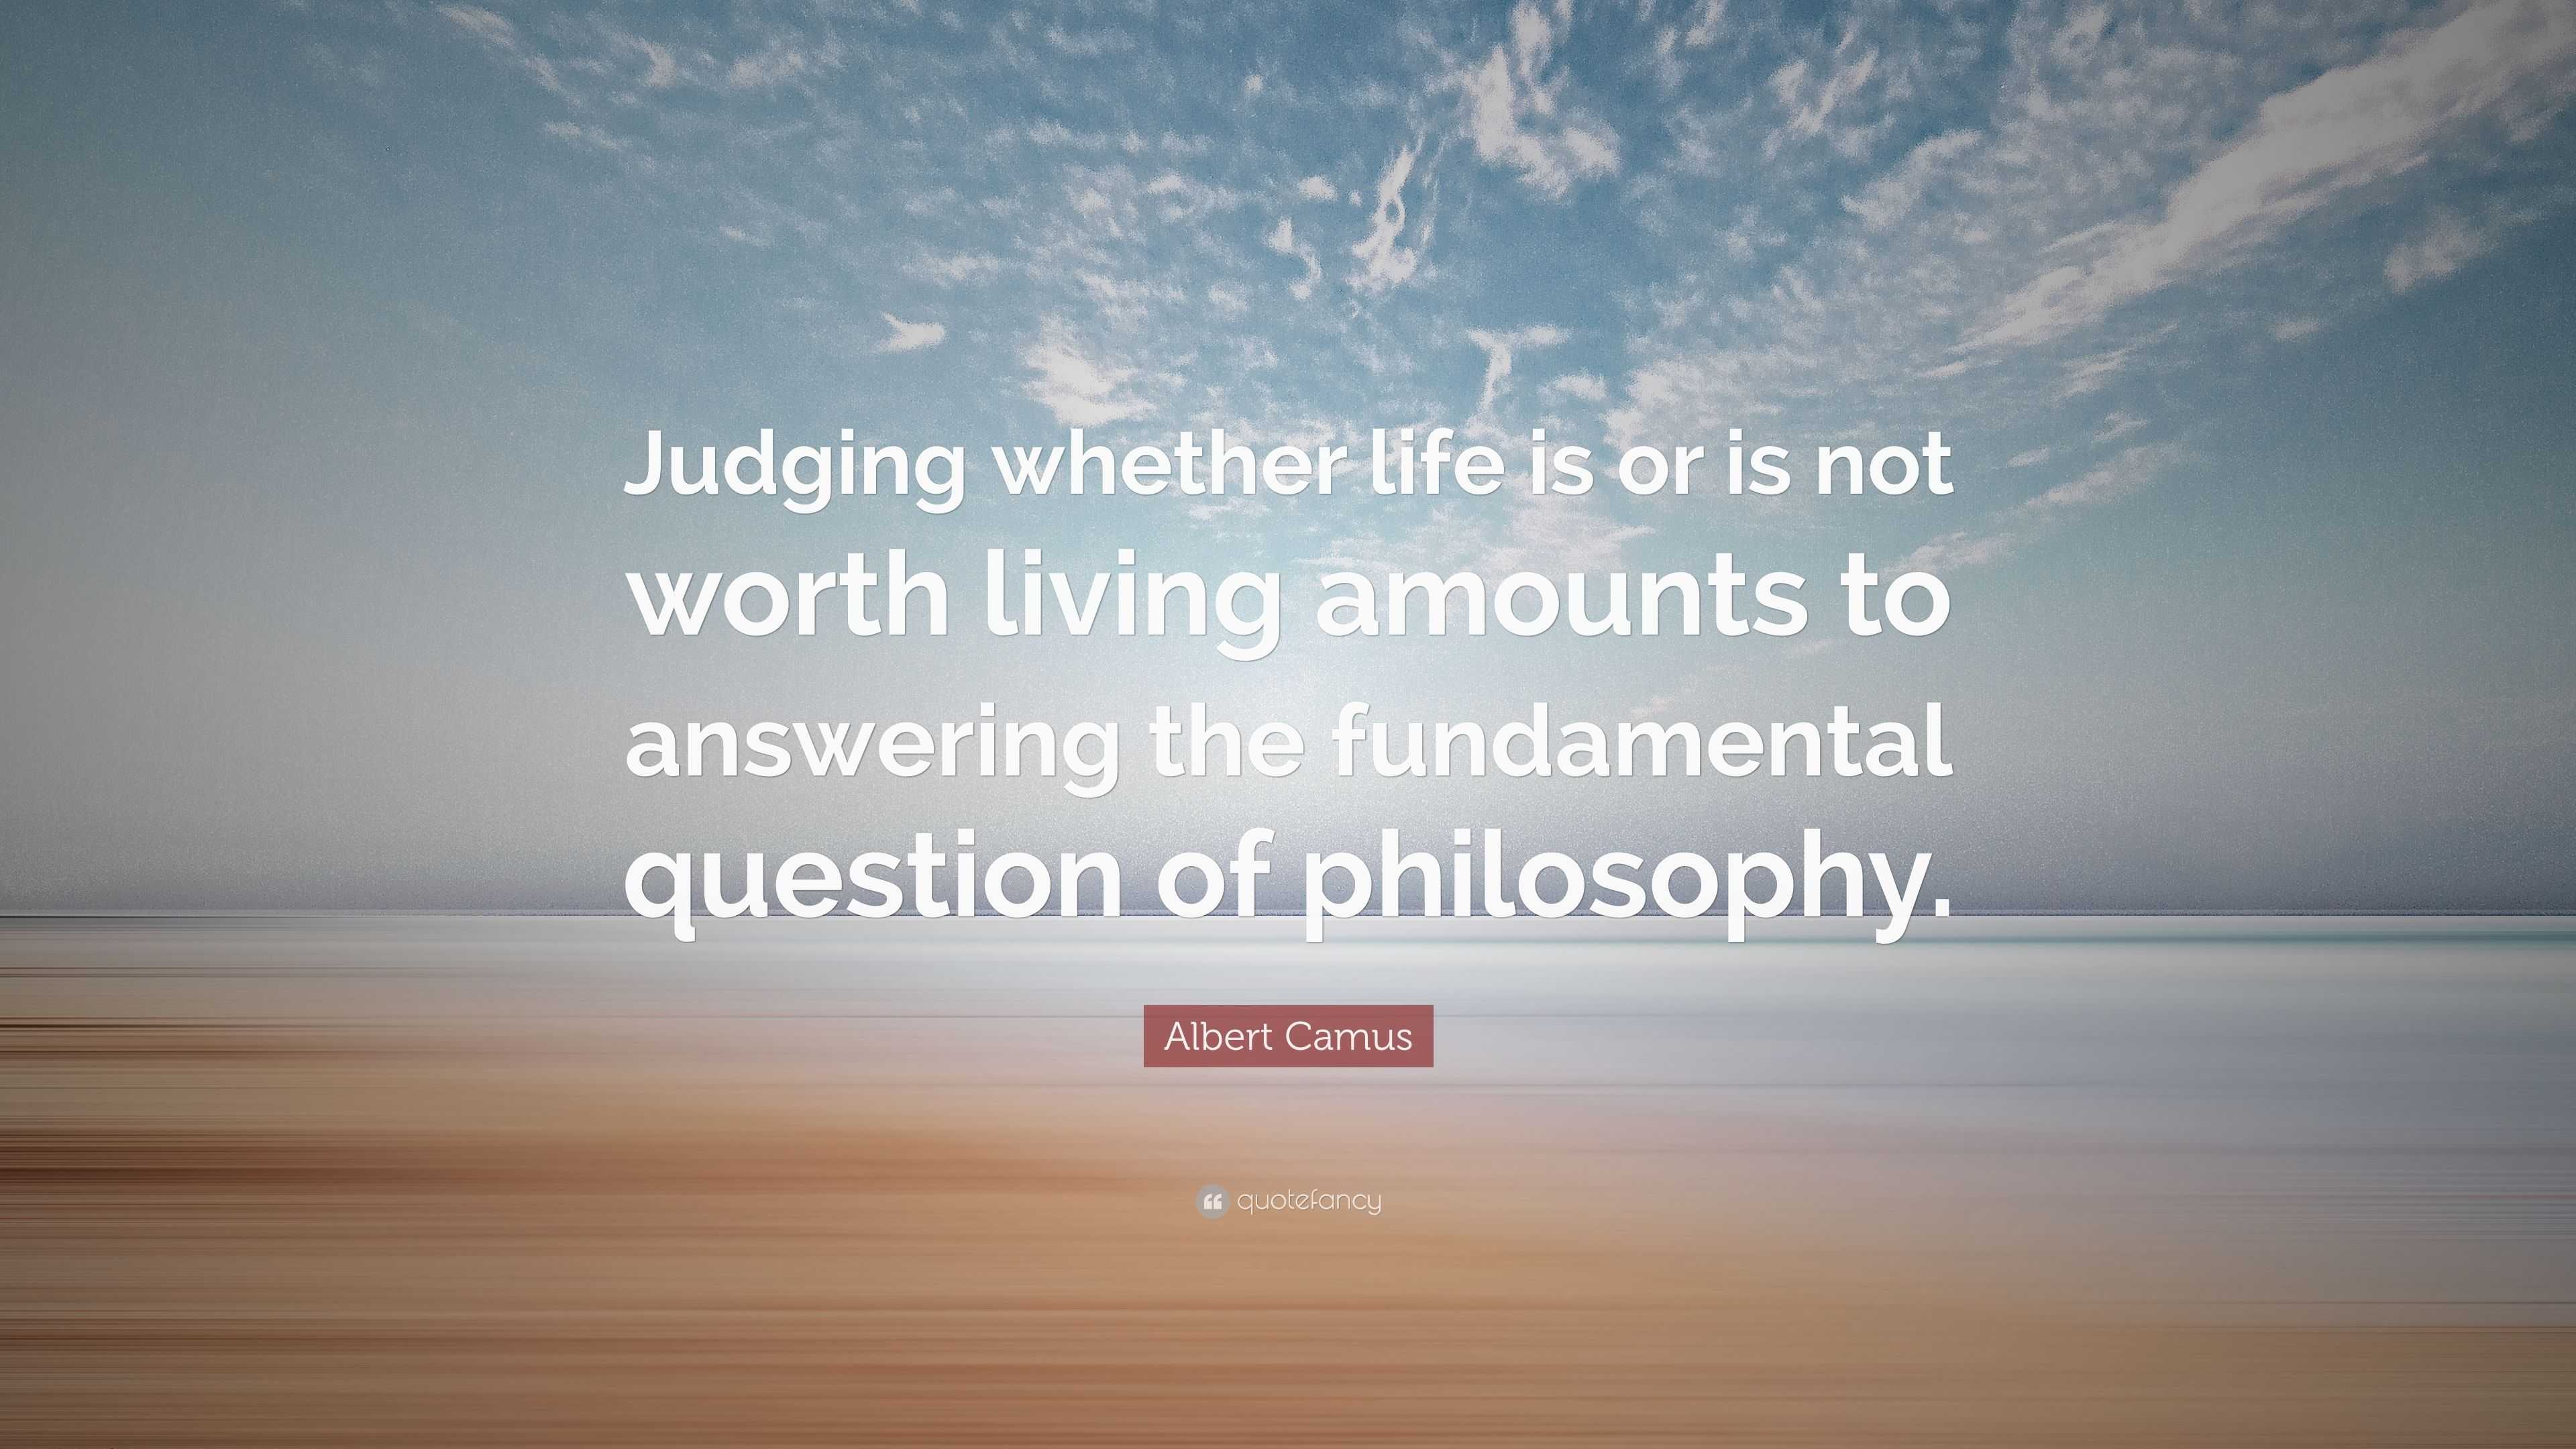 Albert Camus Quote “judging Whether Life Is Or Is Not Worth Living Amounts To Answering The